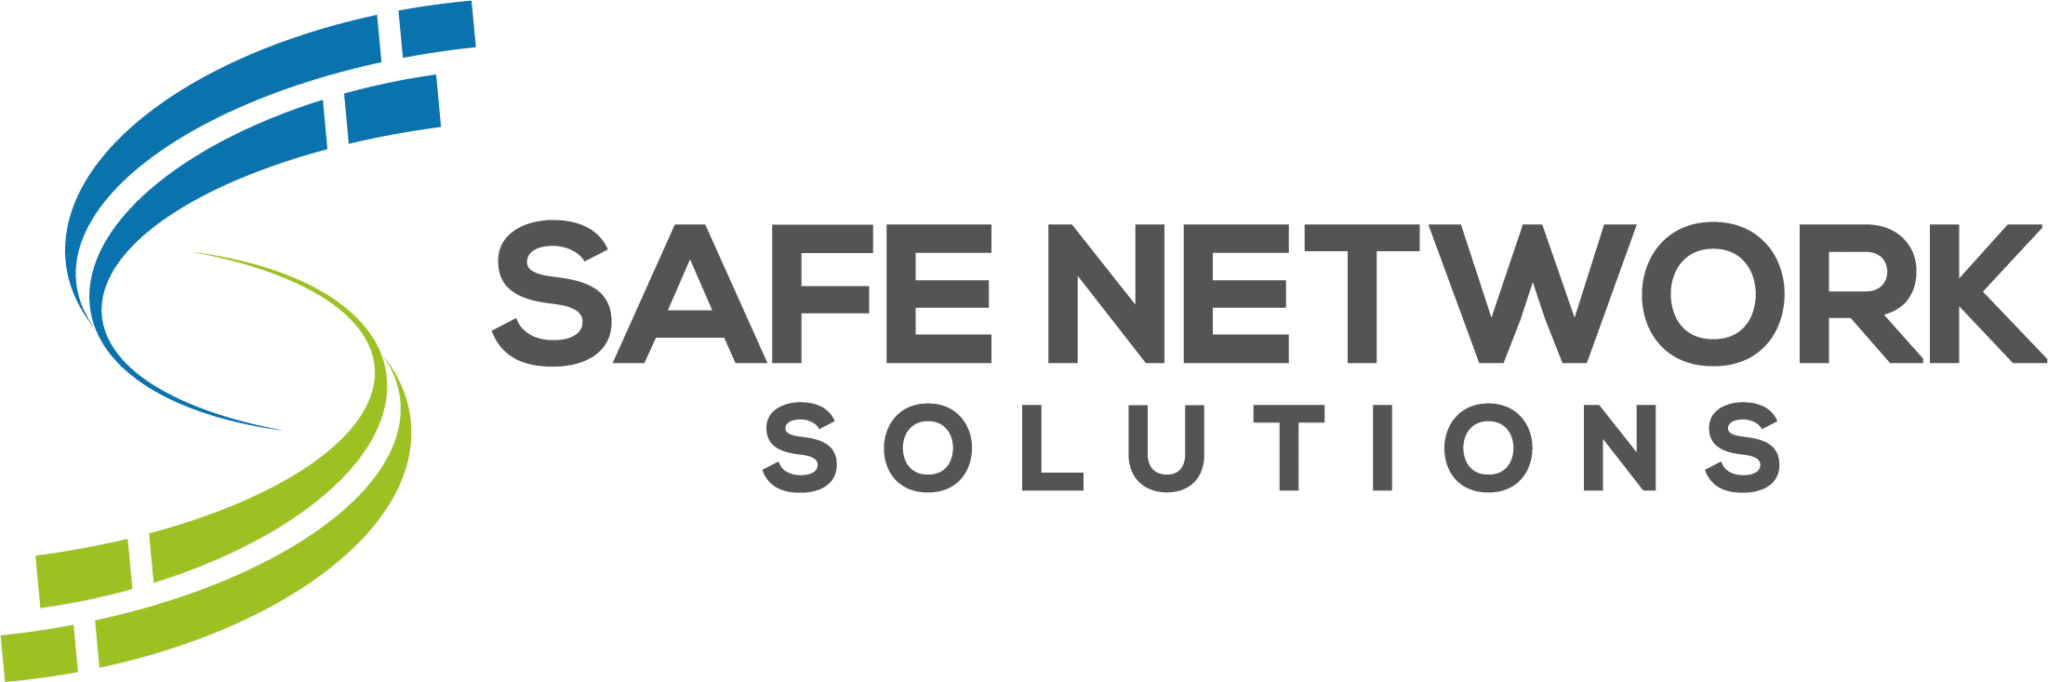 Contact Us - Managed Services | Safe Network Solutions | Nashville, TN